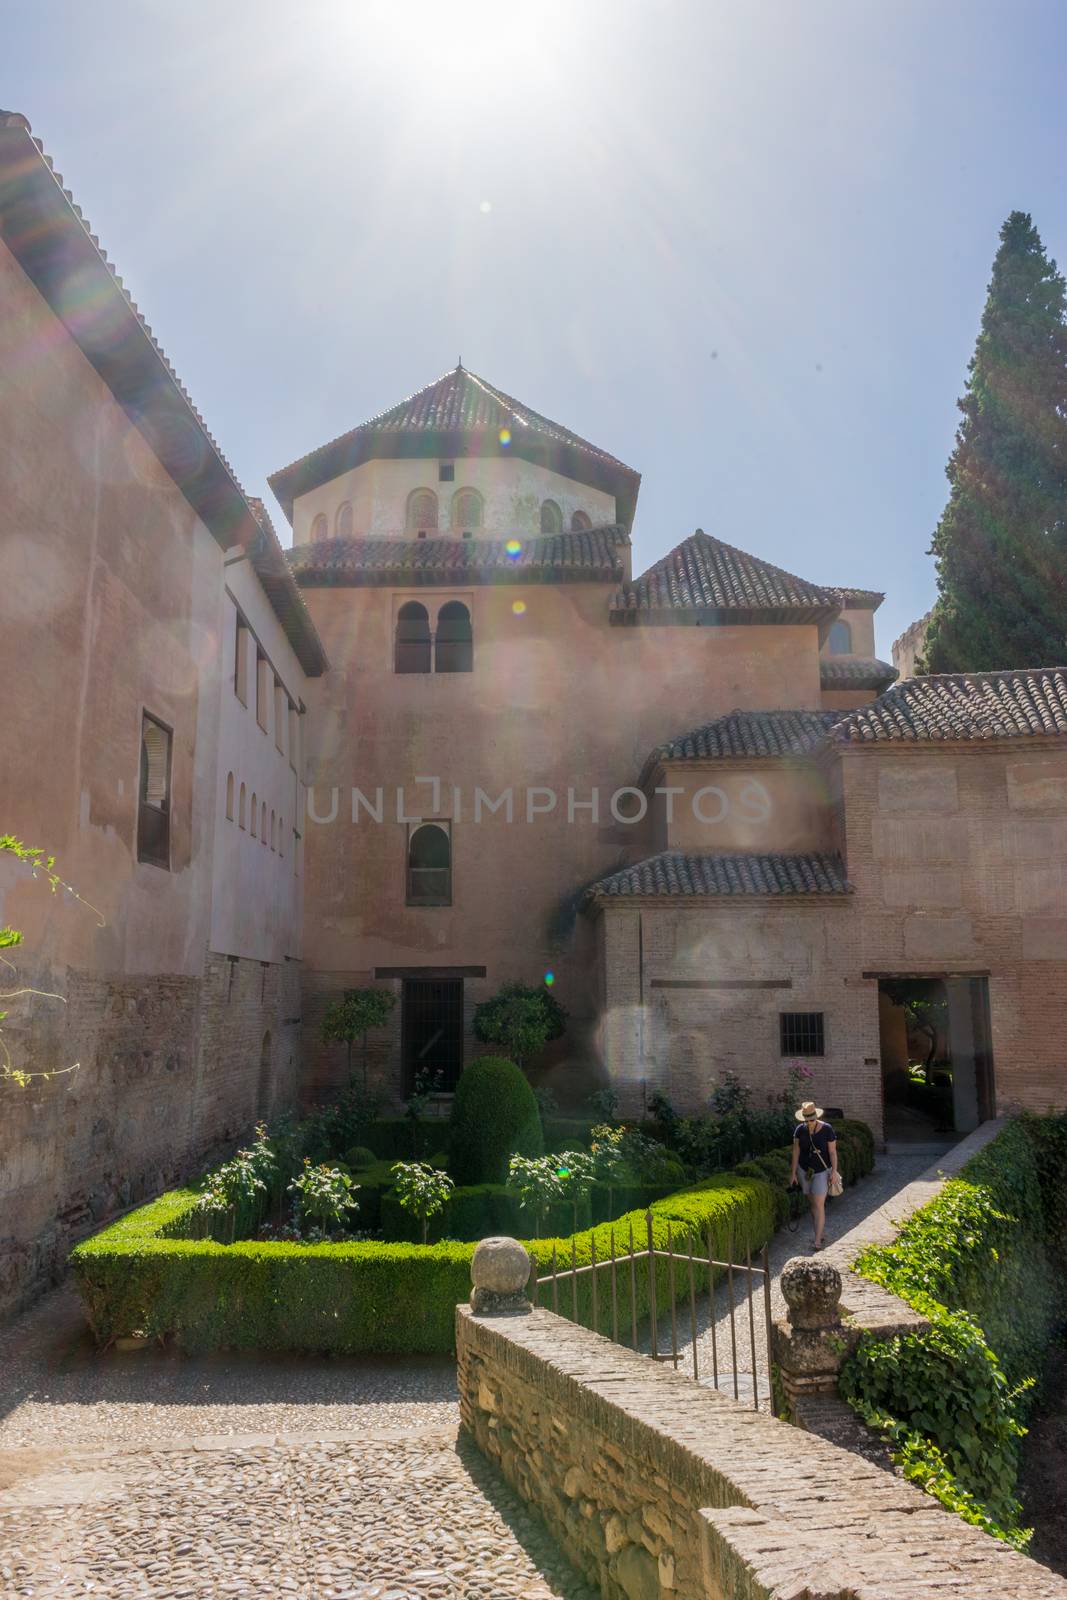 The palace of the Nasrid at Alhambra, Granada, Spain on a brighr summer day with sun flare